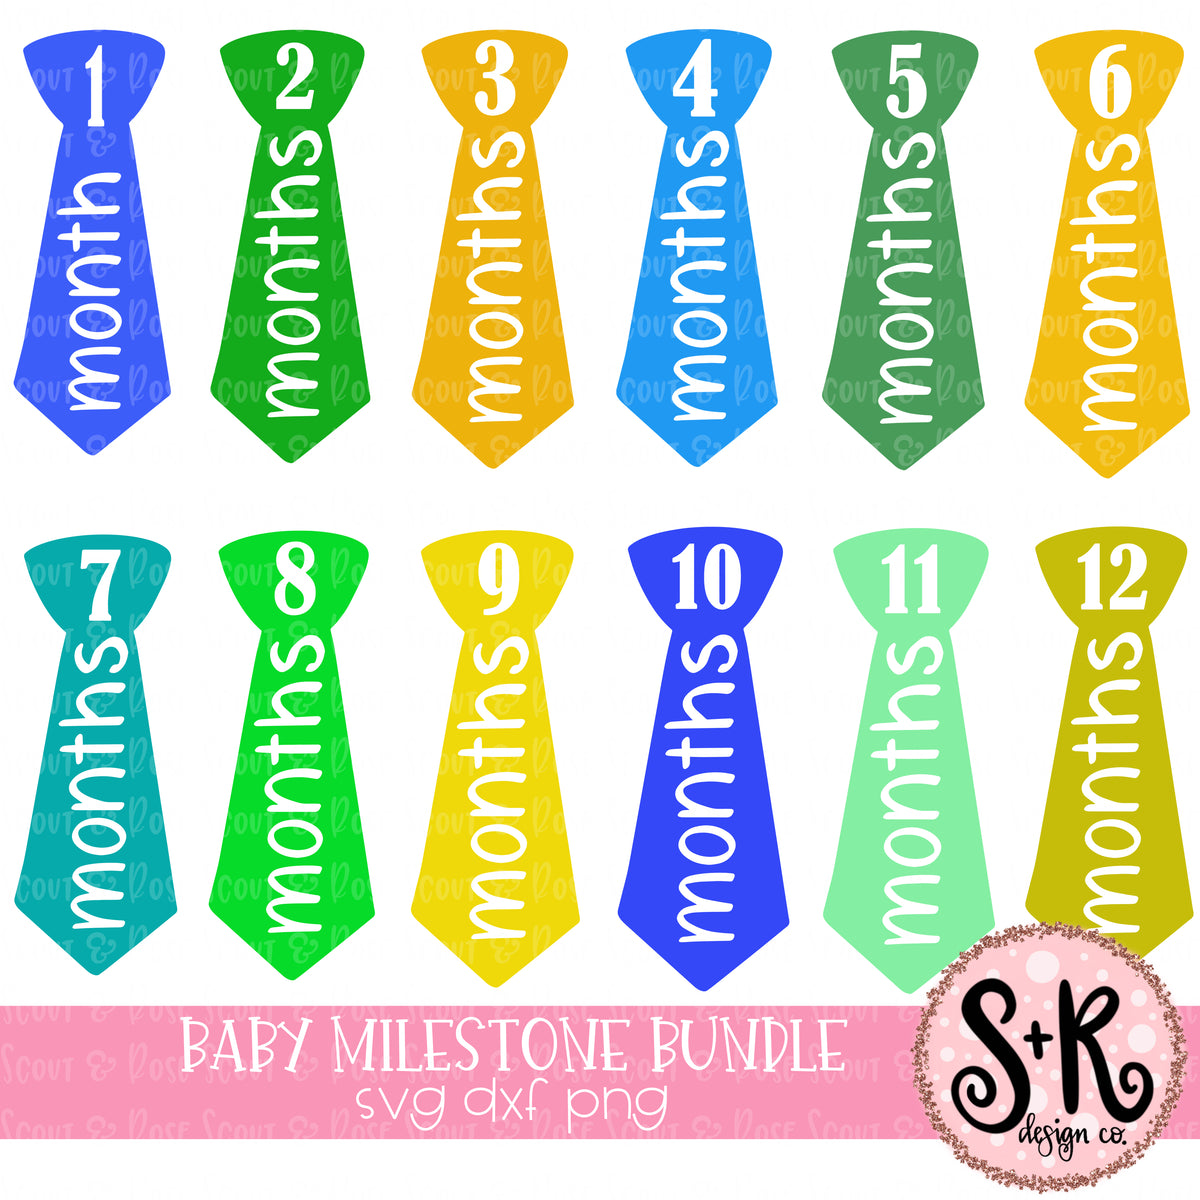 Download Baby Milestone Bundle SVG DXF PNG (2019) - Scout and Rose Design Co